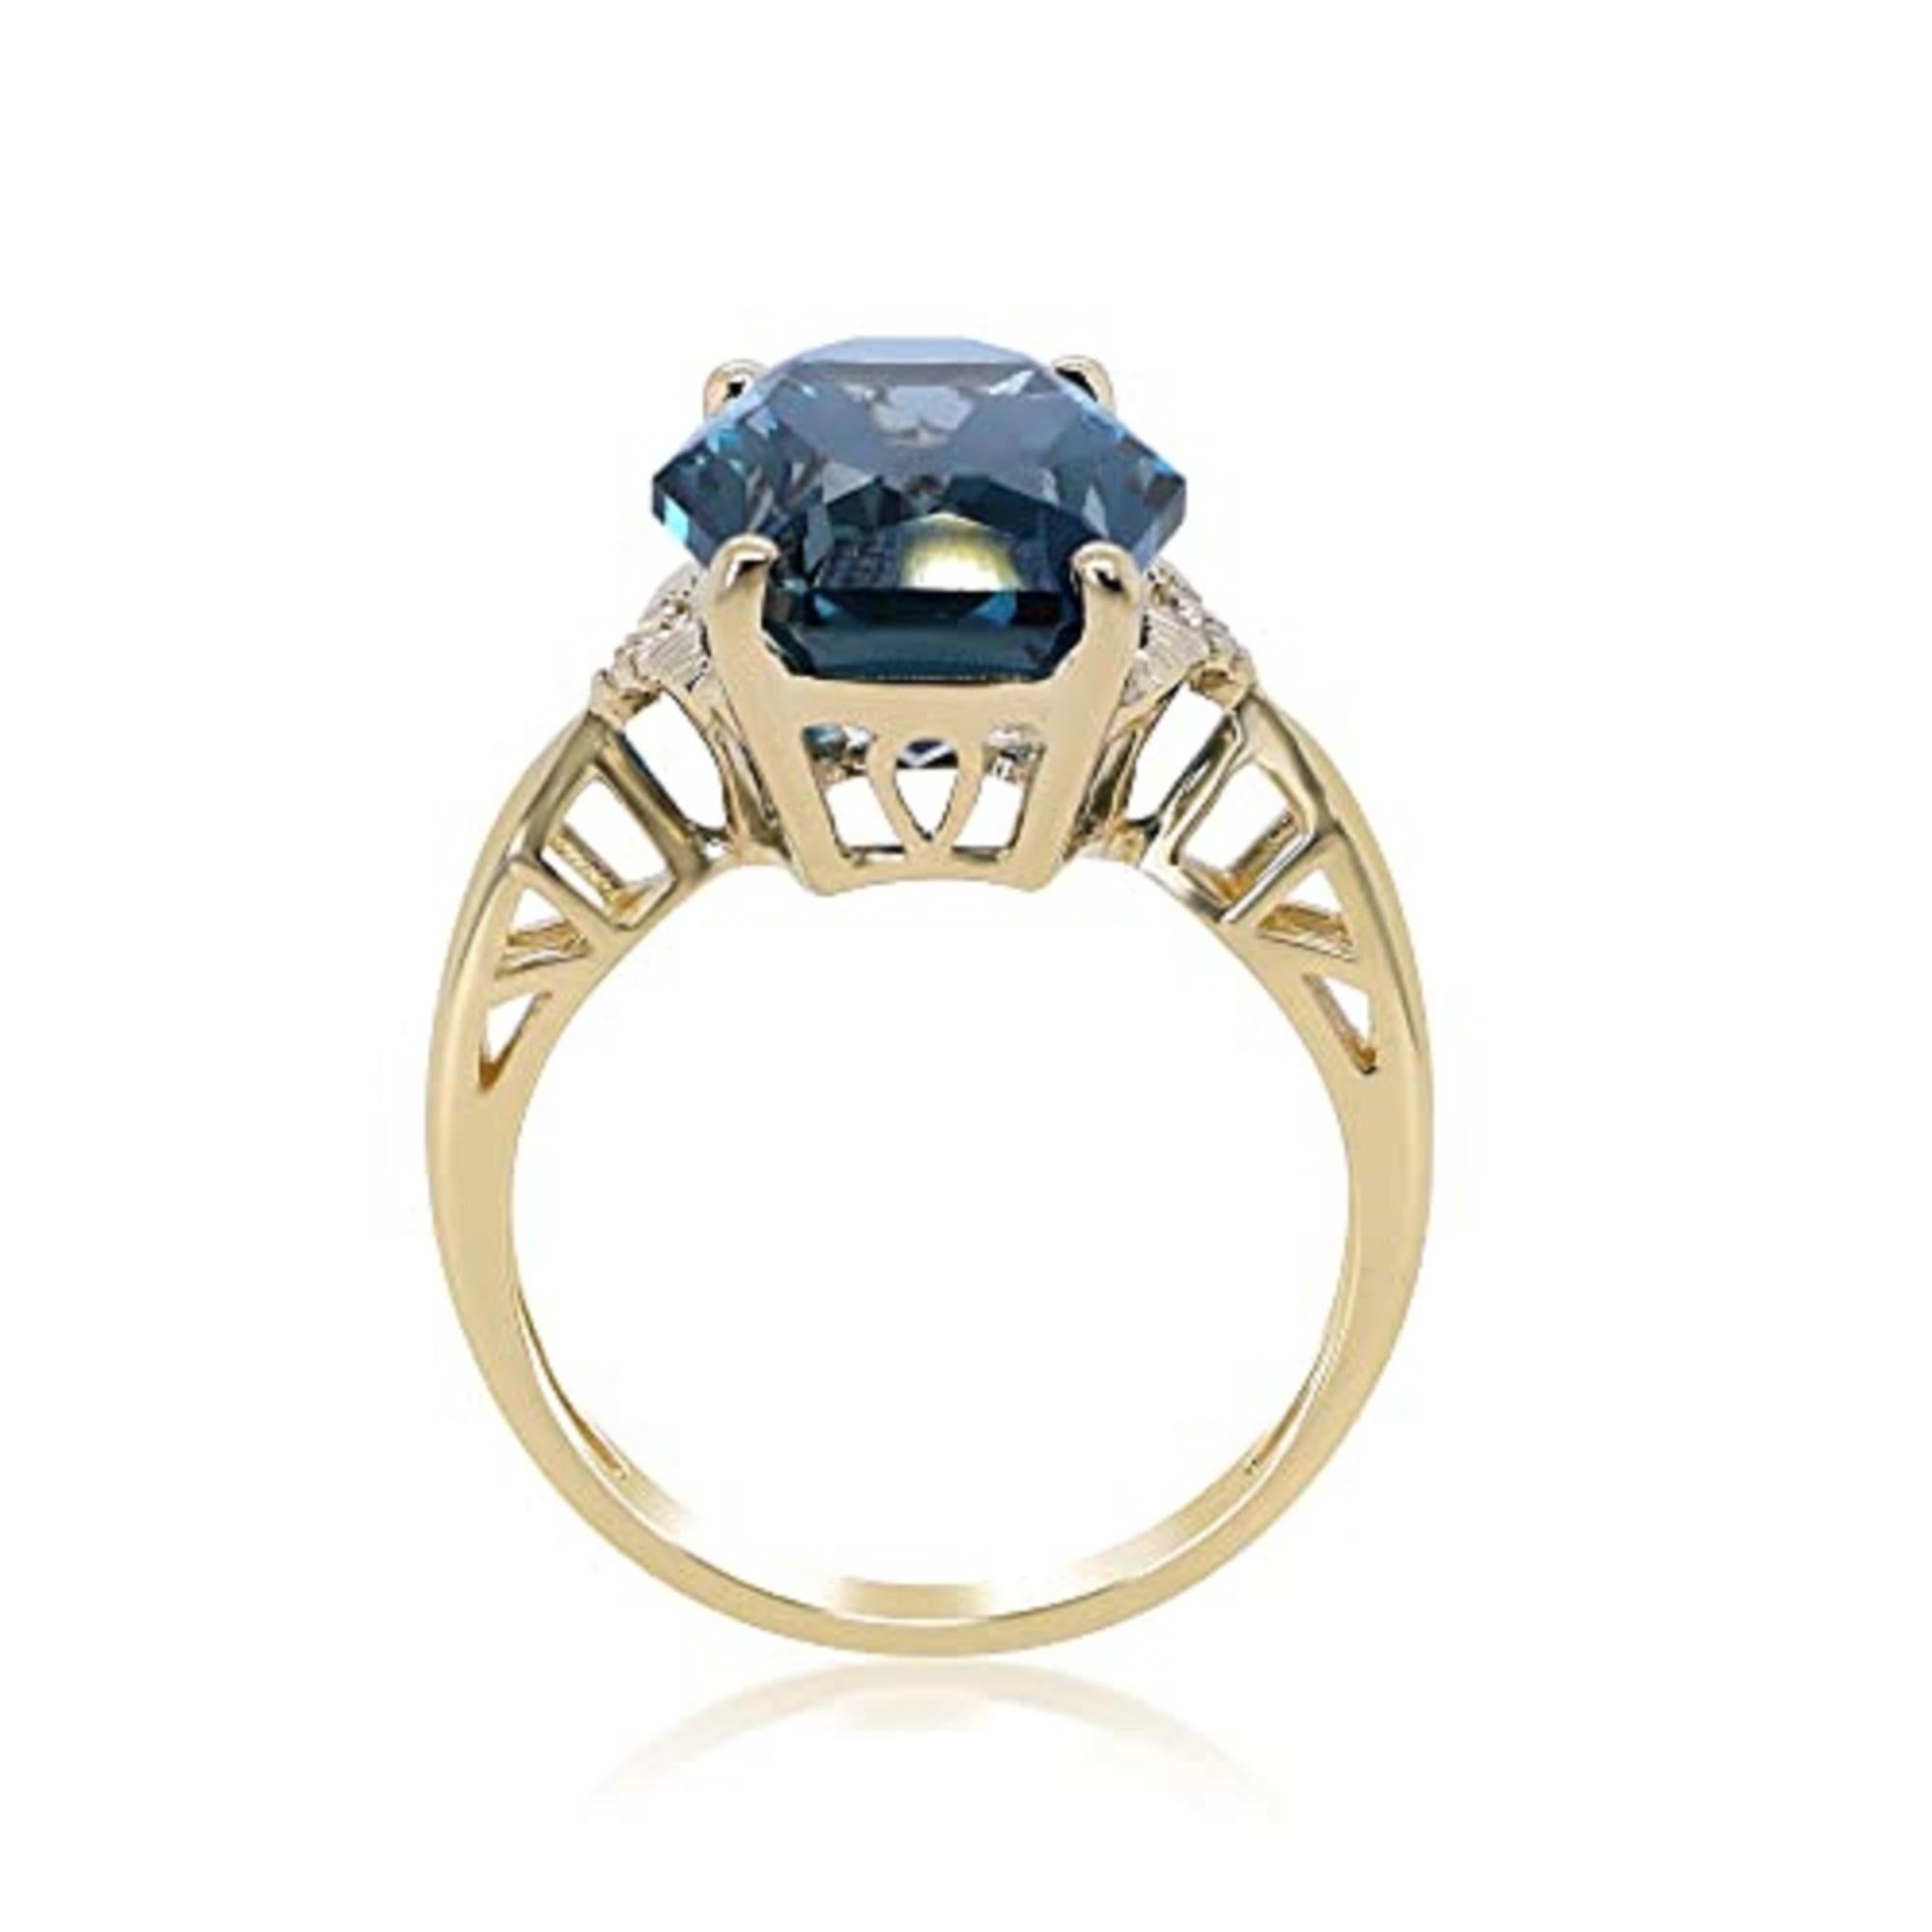 Decorate yourself in elegance with this Ring is crafted from 14-karat Yellow Gold by Gin & Grace. This Ring is made up of 12x16 mm Cushion-Cut (1 pcs) 11.17 carat London Blue Topaz and Round-cut White Diamond (6 Pcs) 0.04 Carat. This Ring is weight